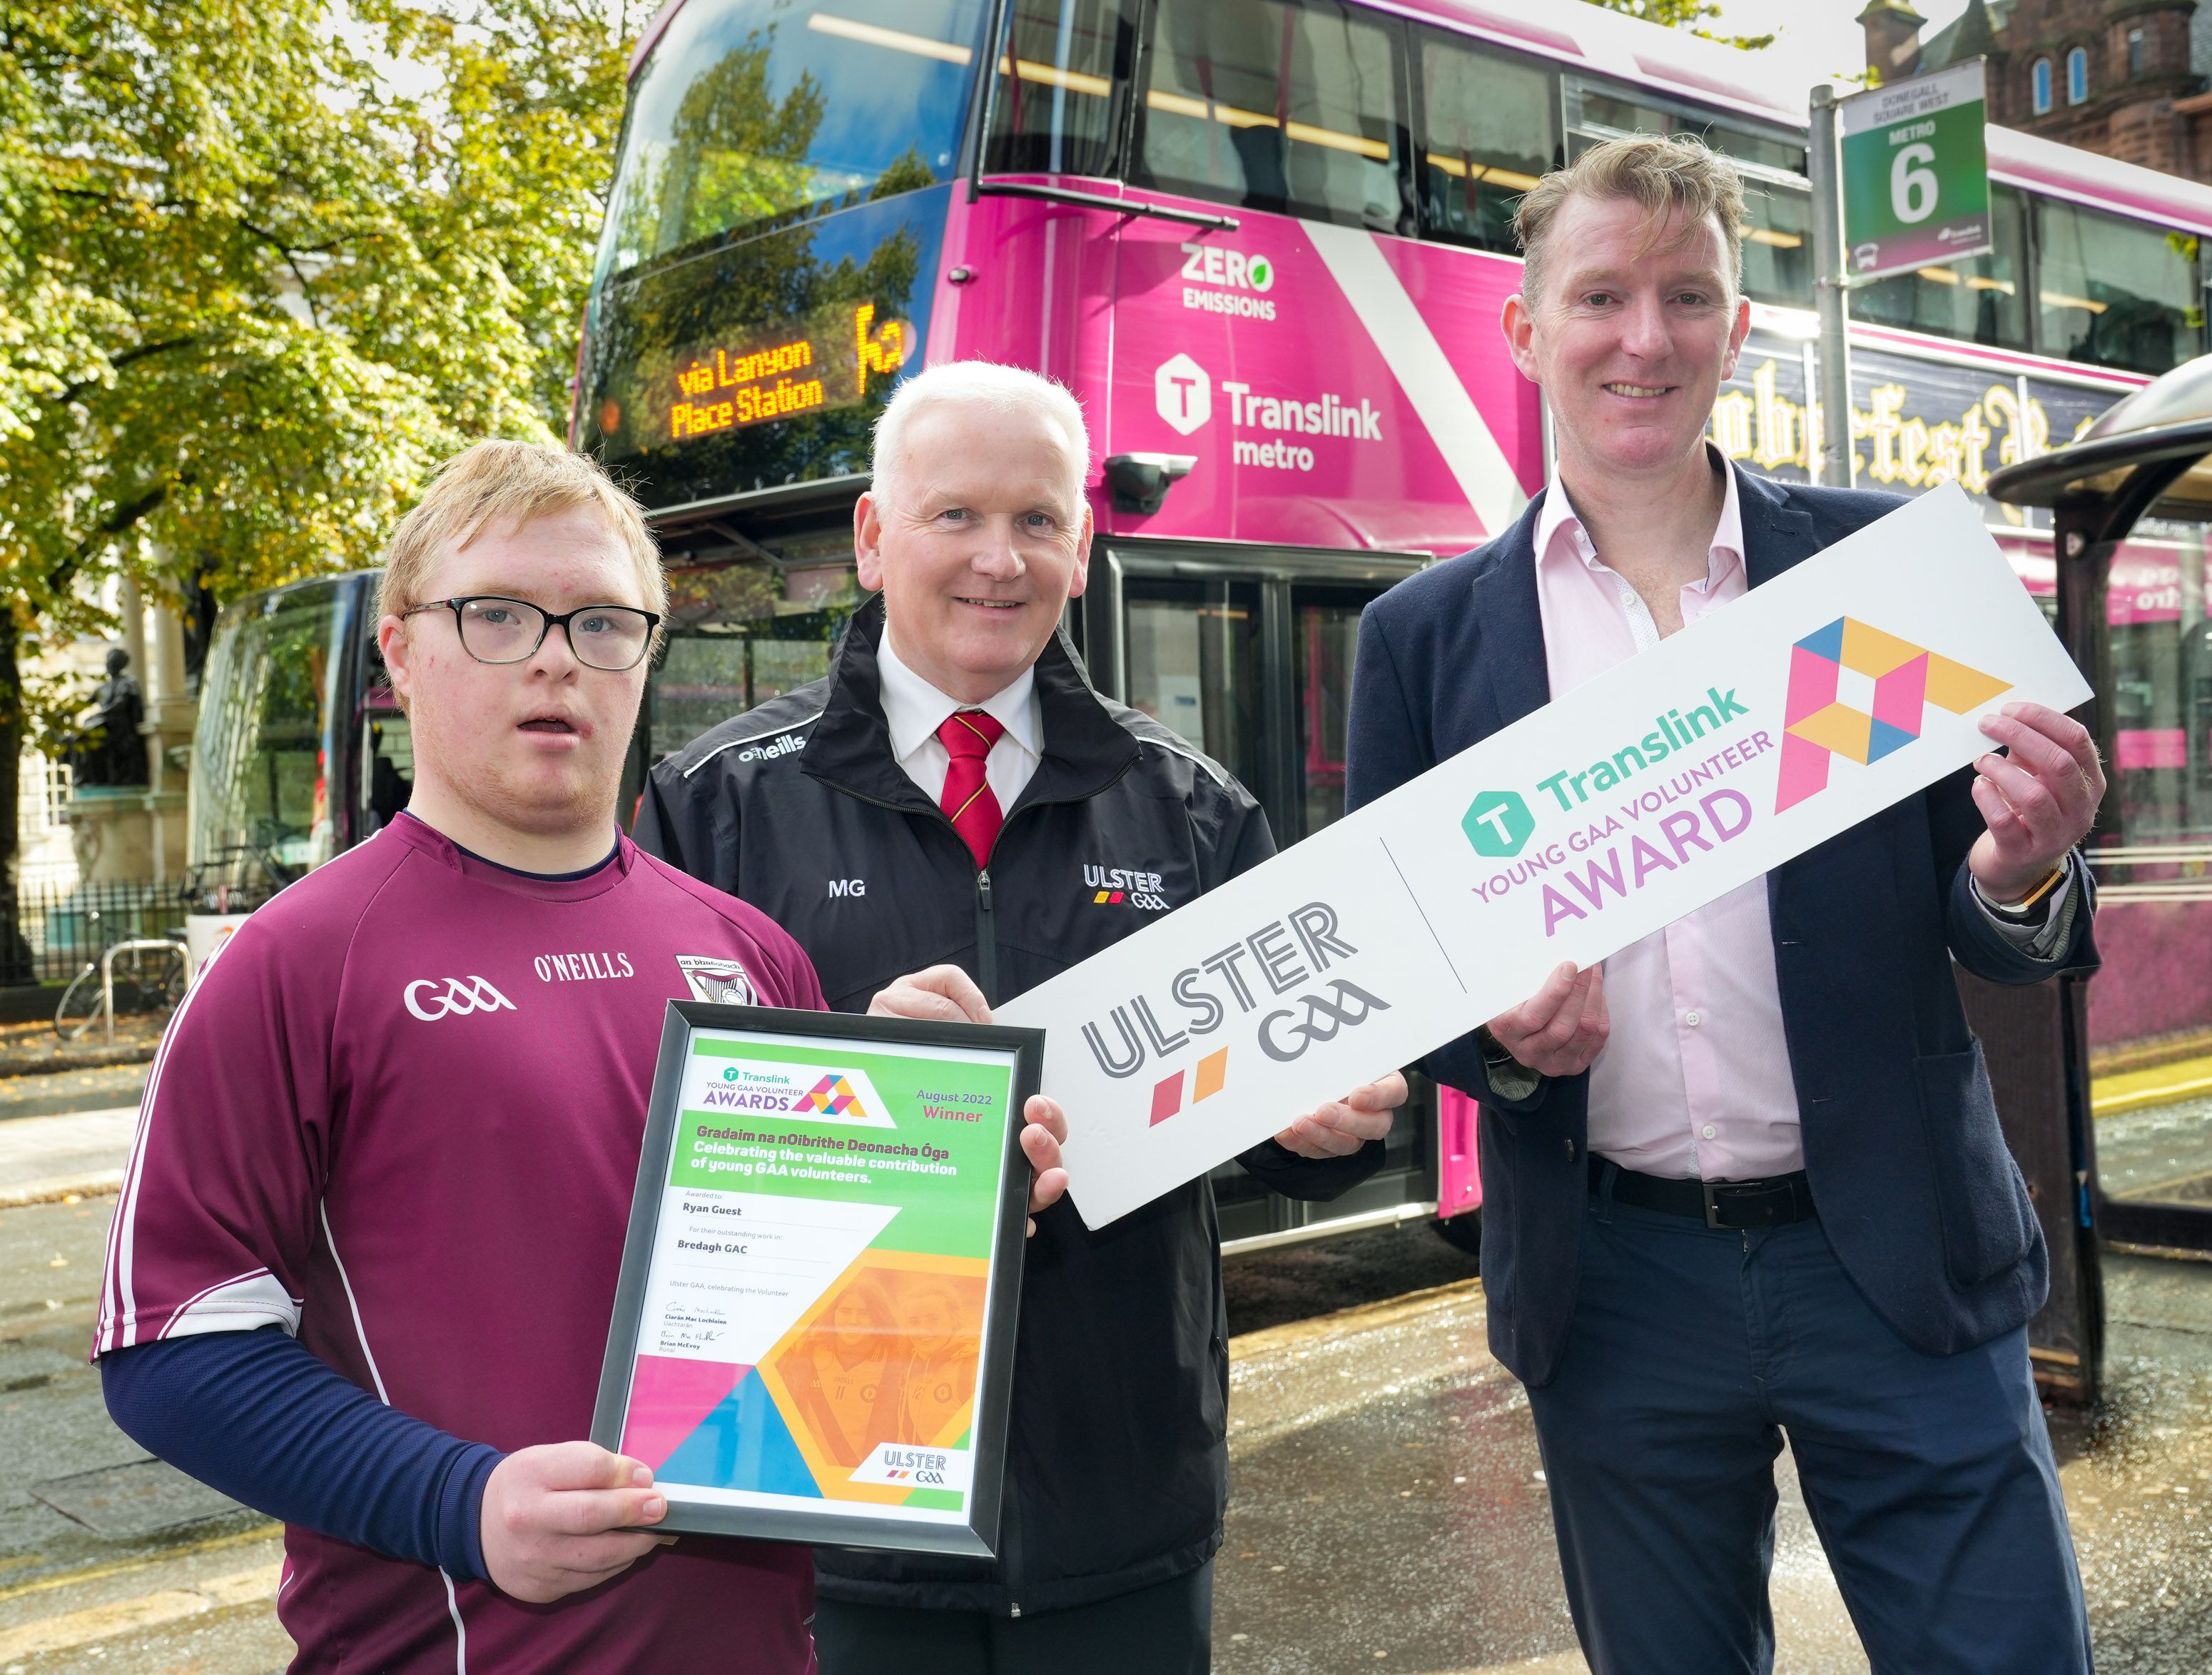 Michael Geoghegan, Ulster GAA Vice President, Damian Bannon, Translink Service Delivery Manager, and Ryan Guest, Bredagh GAC